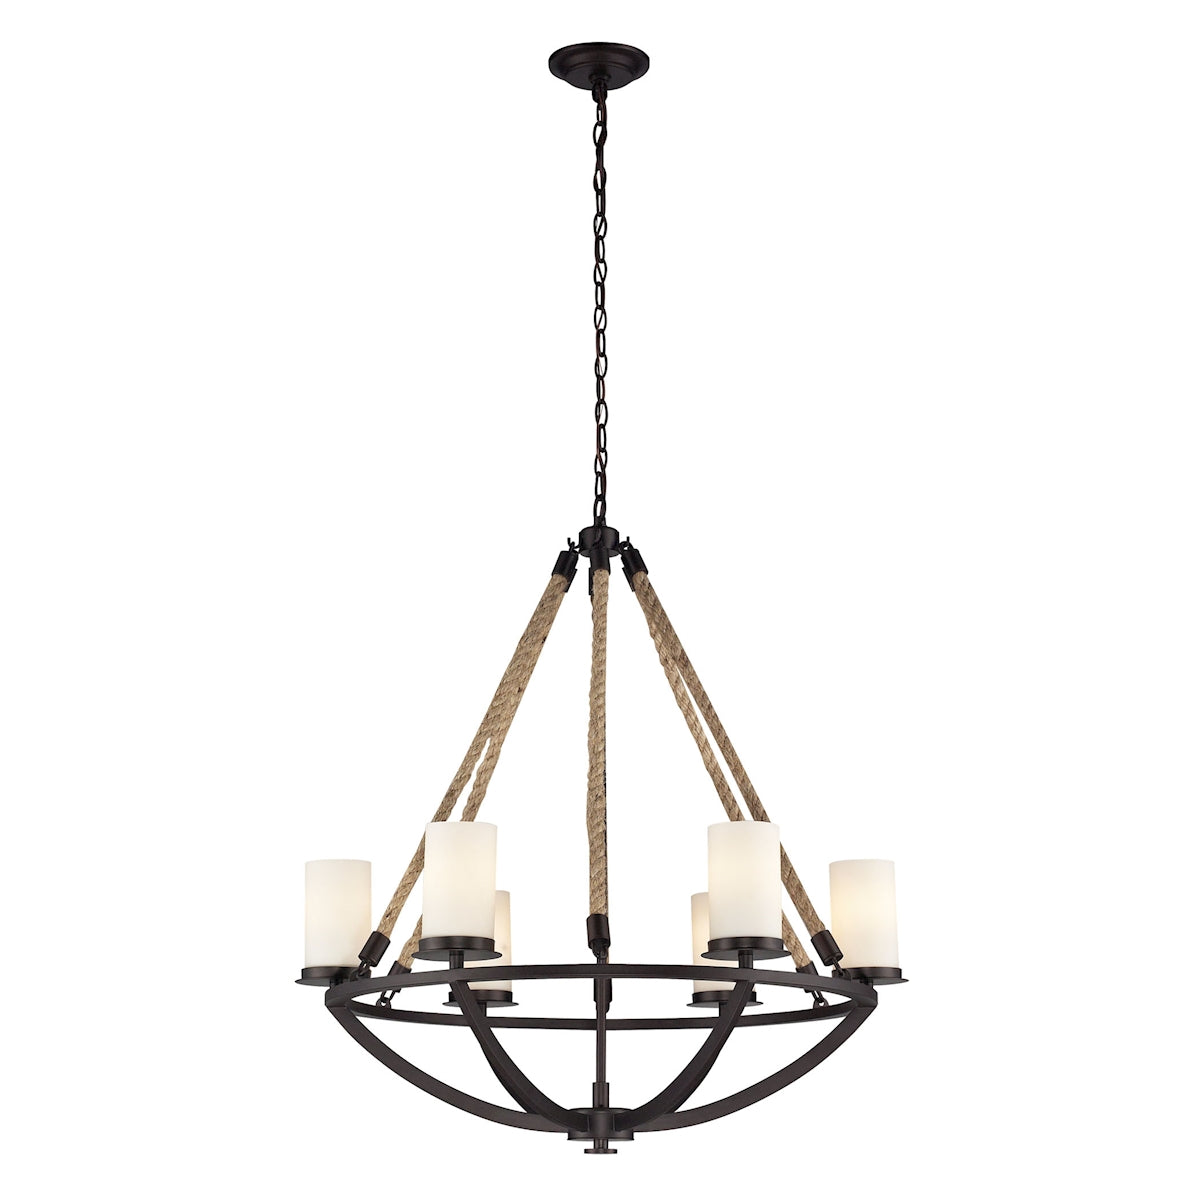 ELK Lighting 63042-6 Natural Rope 6-Light Chandelier in Aged Bronze with White Glass